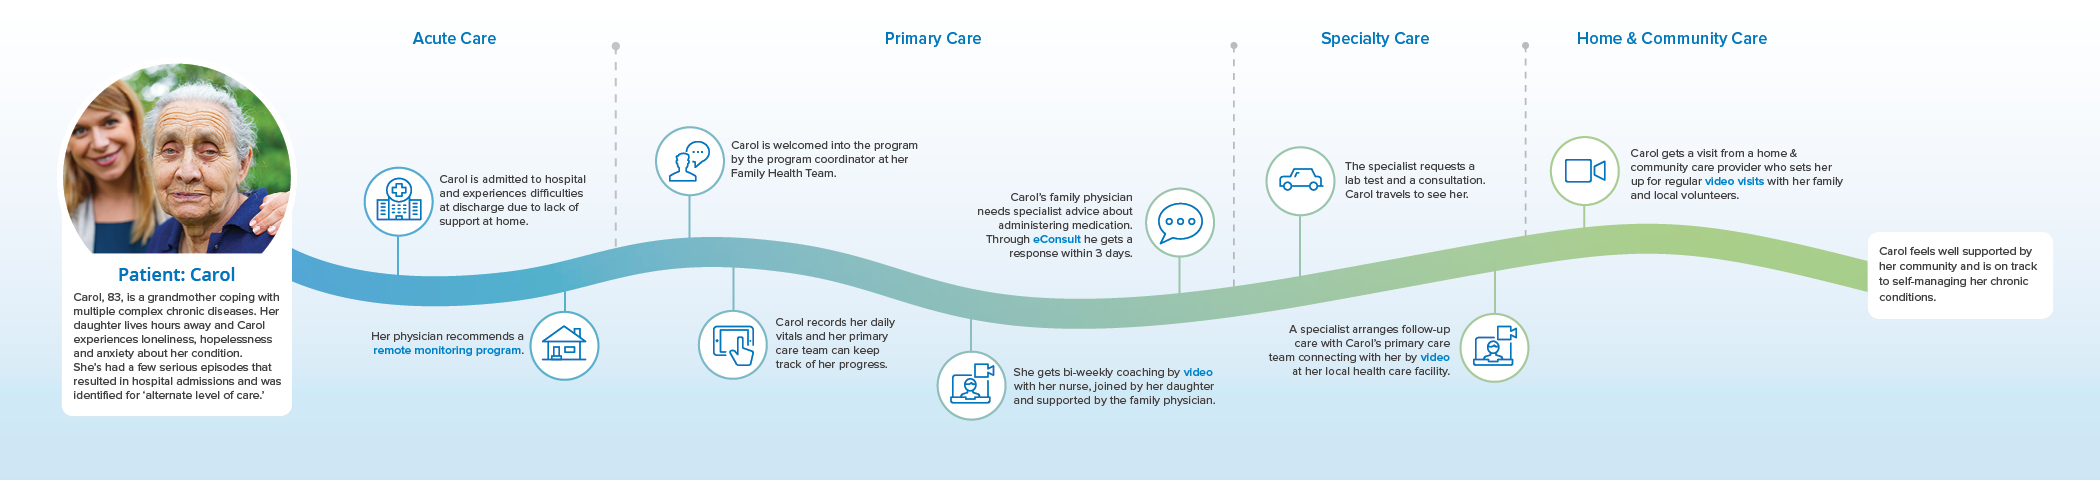 Seniors and Others with Chronic Care Needs patient journey image